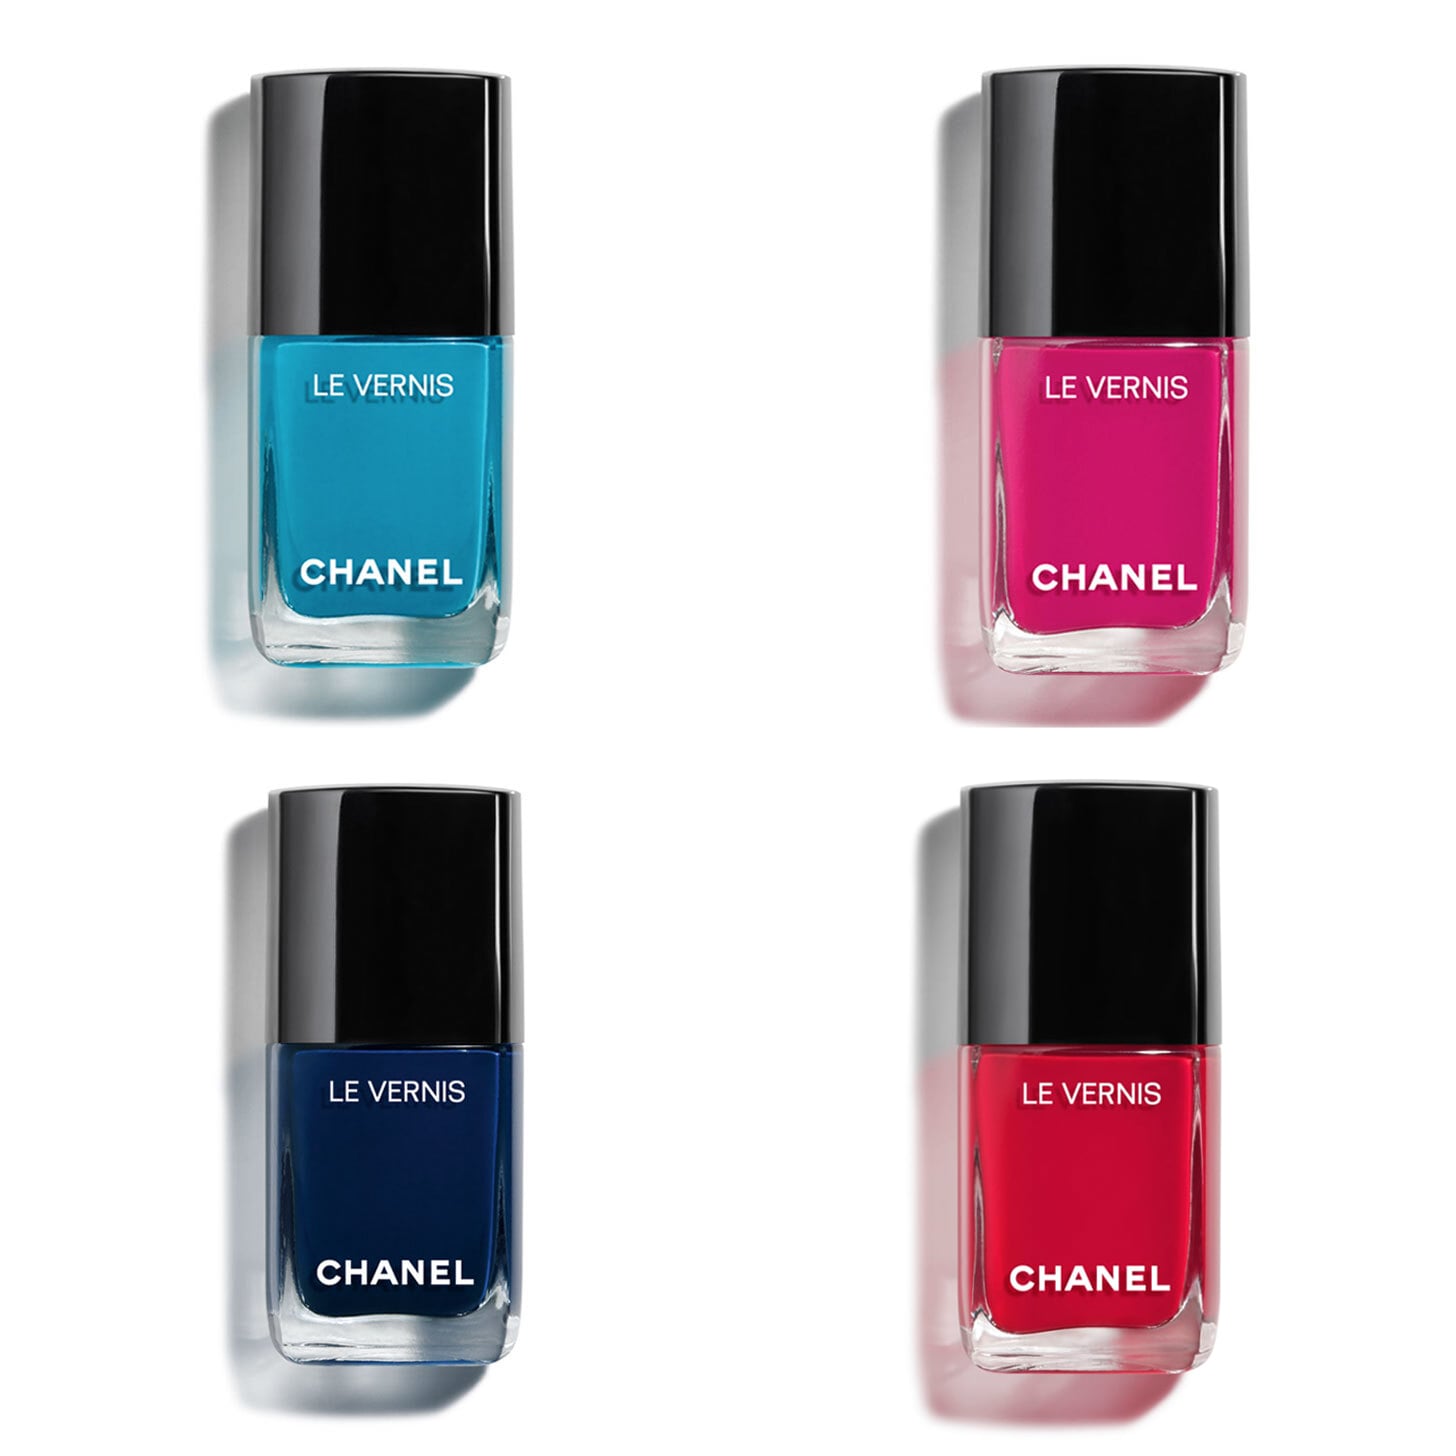 Chanel Le Vernis Longwear Colour | Introducing the Stylish Nail Art of 2020: Chanel-Inspired Embossed Manicure | POPSUGAR Beauty Photo 6